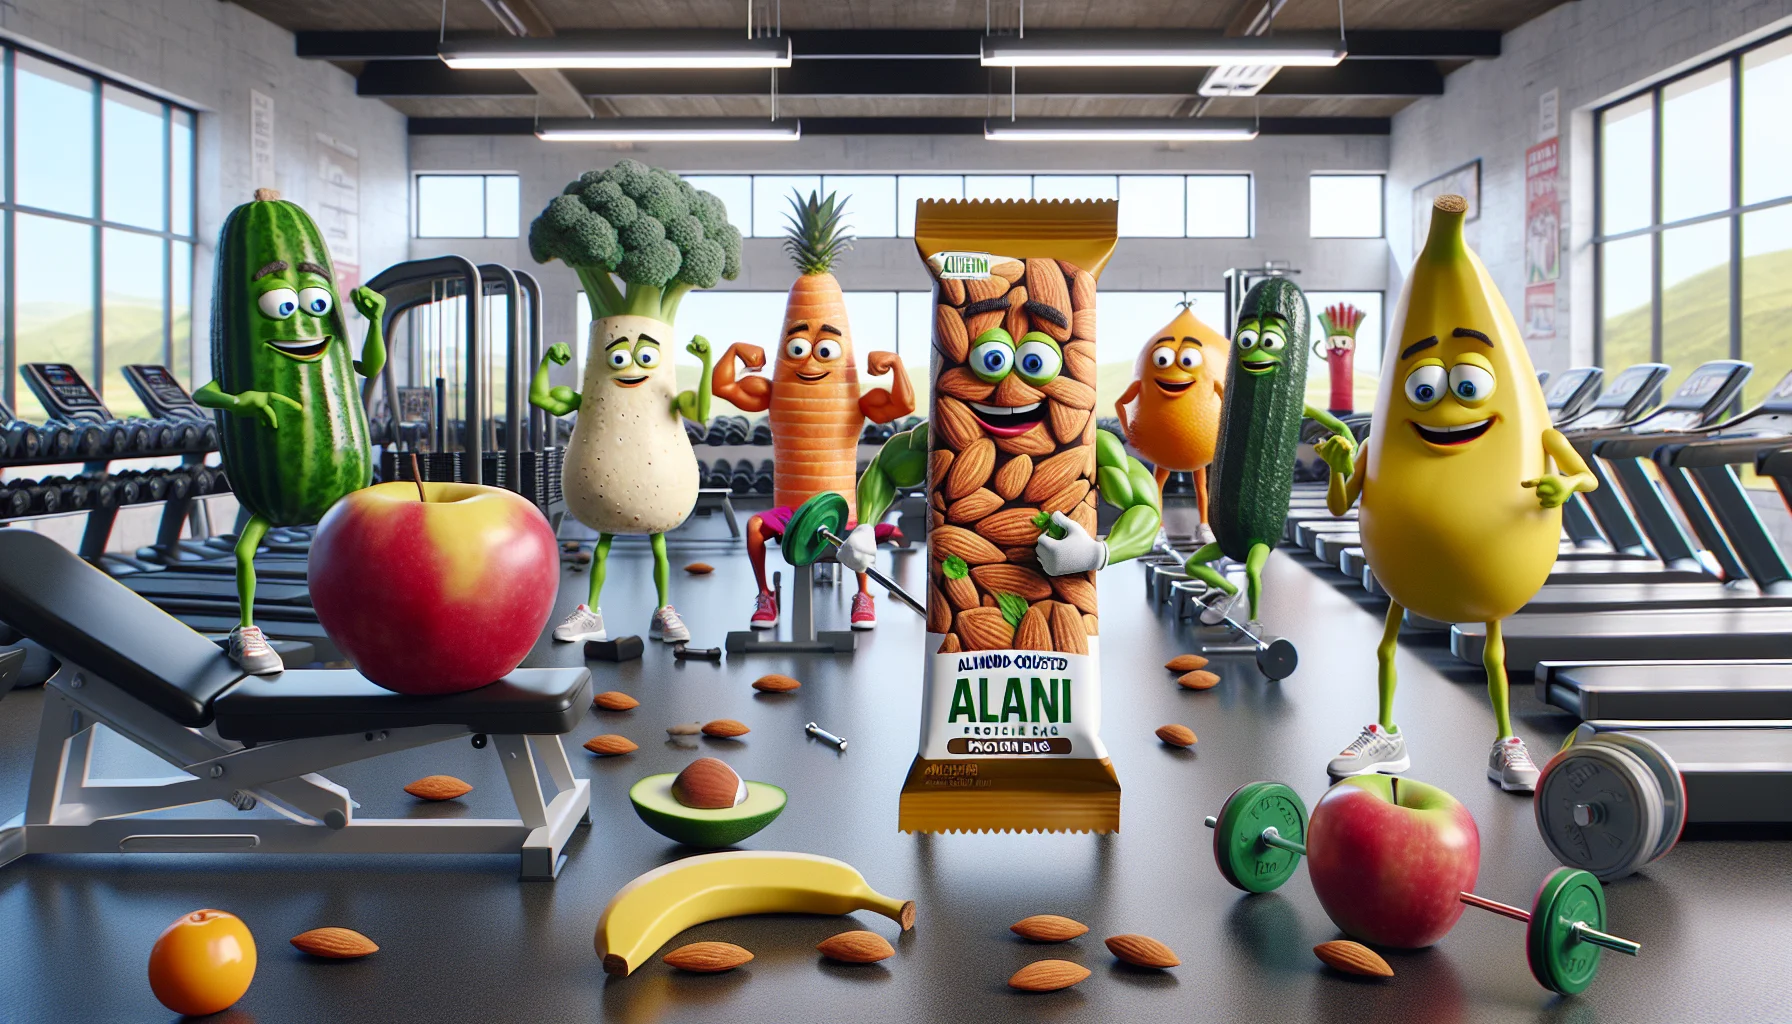 Visualize a humoristic scenario where almond-crusted Alani protein bars take the roles of gym instructors training various fruits and vegetables in a fitness center. The protein bars, with their funny animated expressions, are encouraging the fruits and veggies who are engaging in different sport activities such as weightlifting, treadmill, etc. The scene is meant to entice people towards the benefits of supplements in sports. Note that the fruits and the vegetables should have goofy faces and anthropomorphic limbs engaging in the activities, thus emphasizing the funny mood of the scene. The setting is a modern well-equipped gym with lots of natural light.